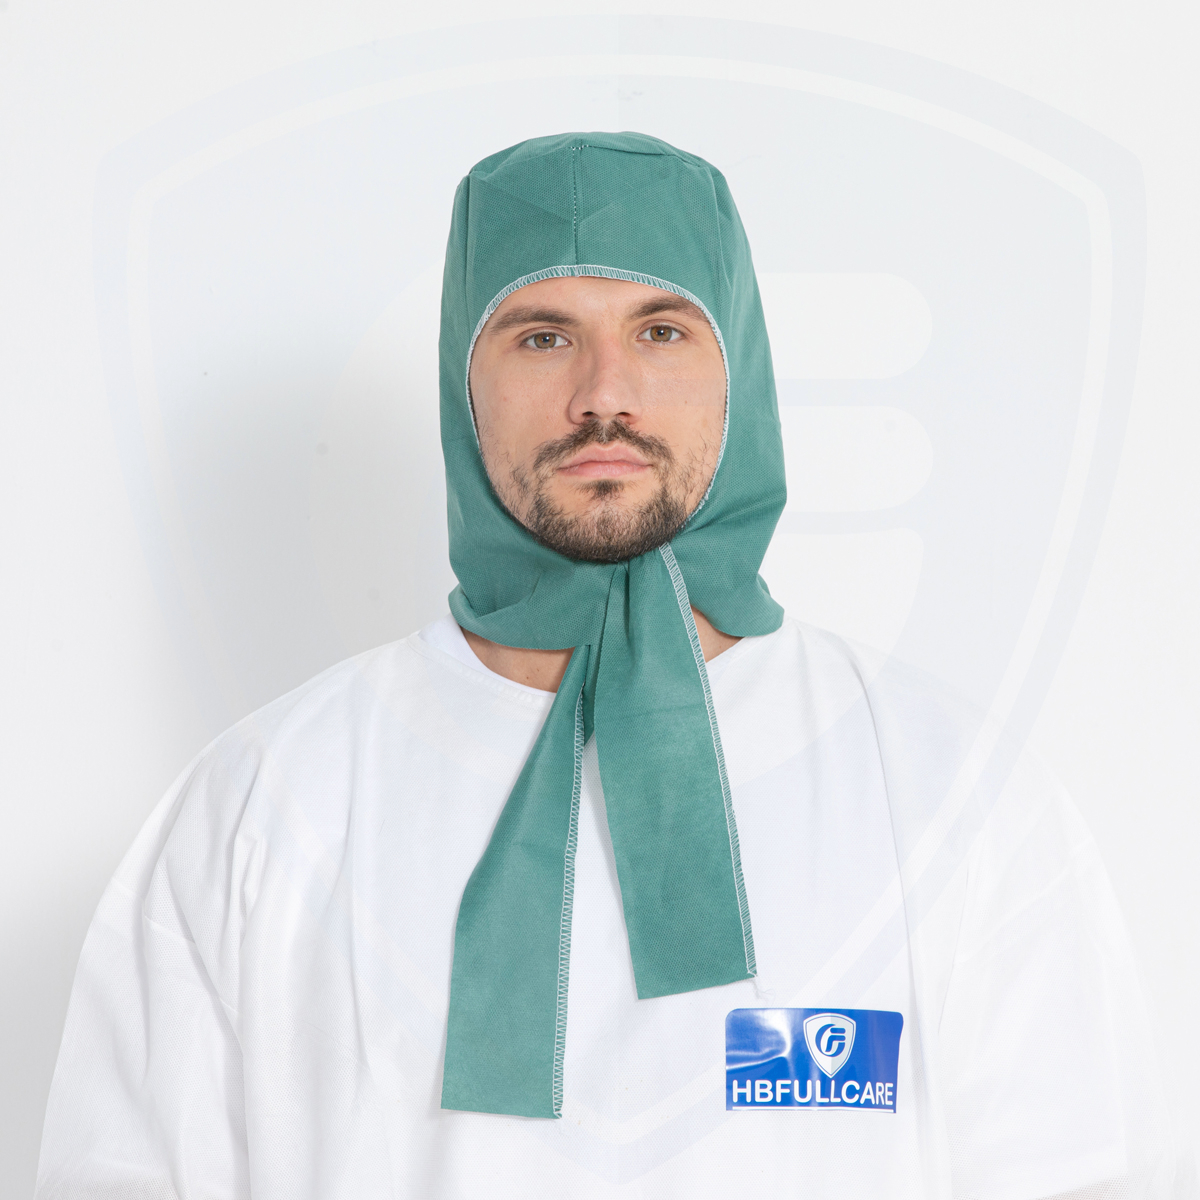  Non-woven Dust-Proof High Quality Disposable Astronaut Cap for Workshop